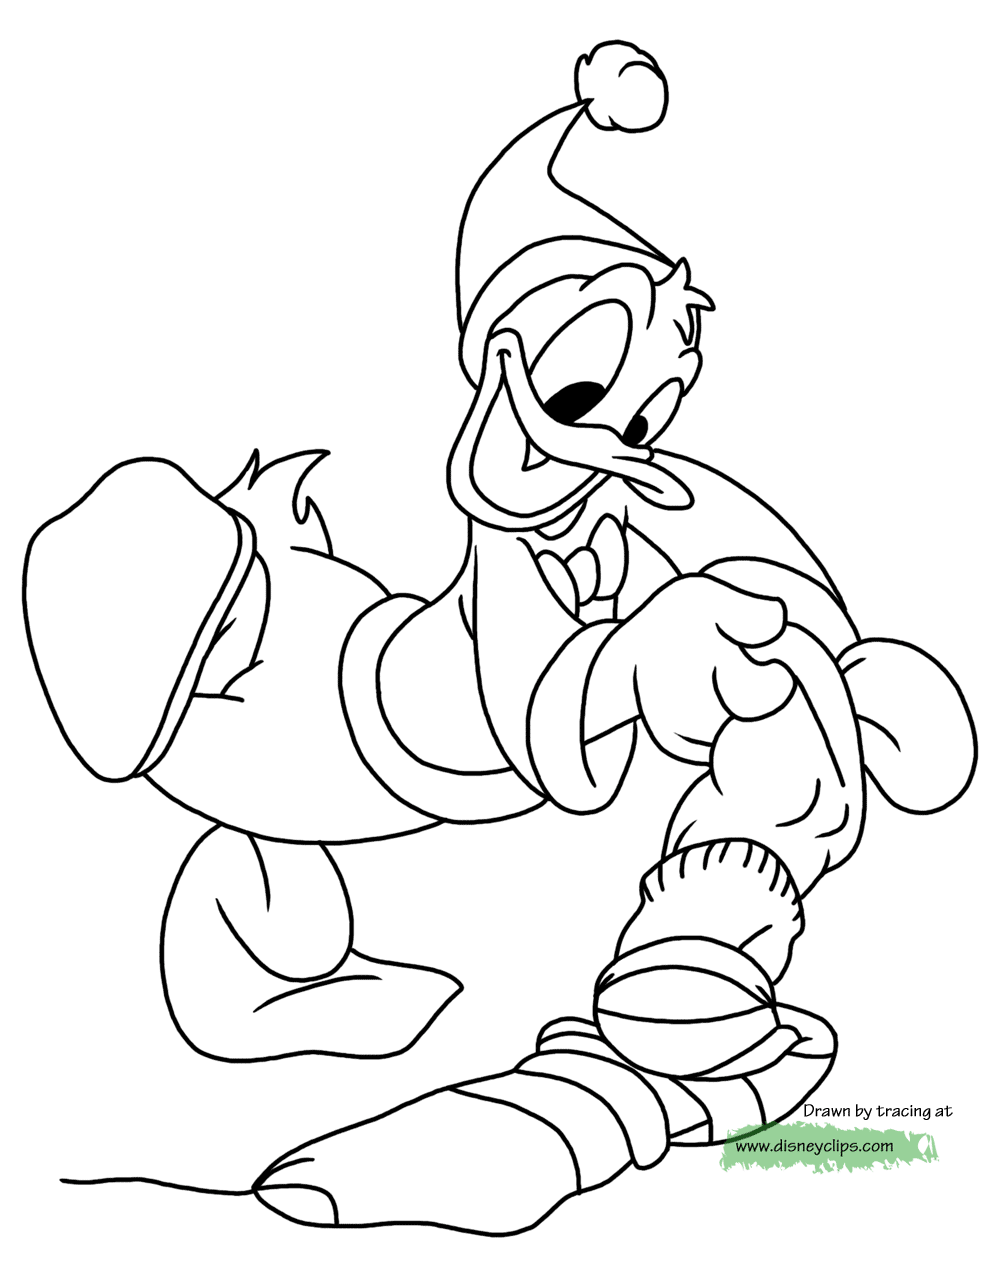 Stitch Disney Christmas Coloring Pages - Juliettsq